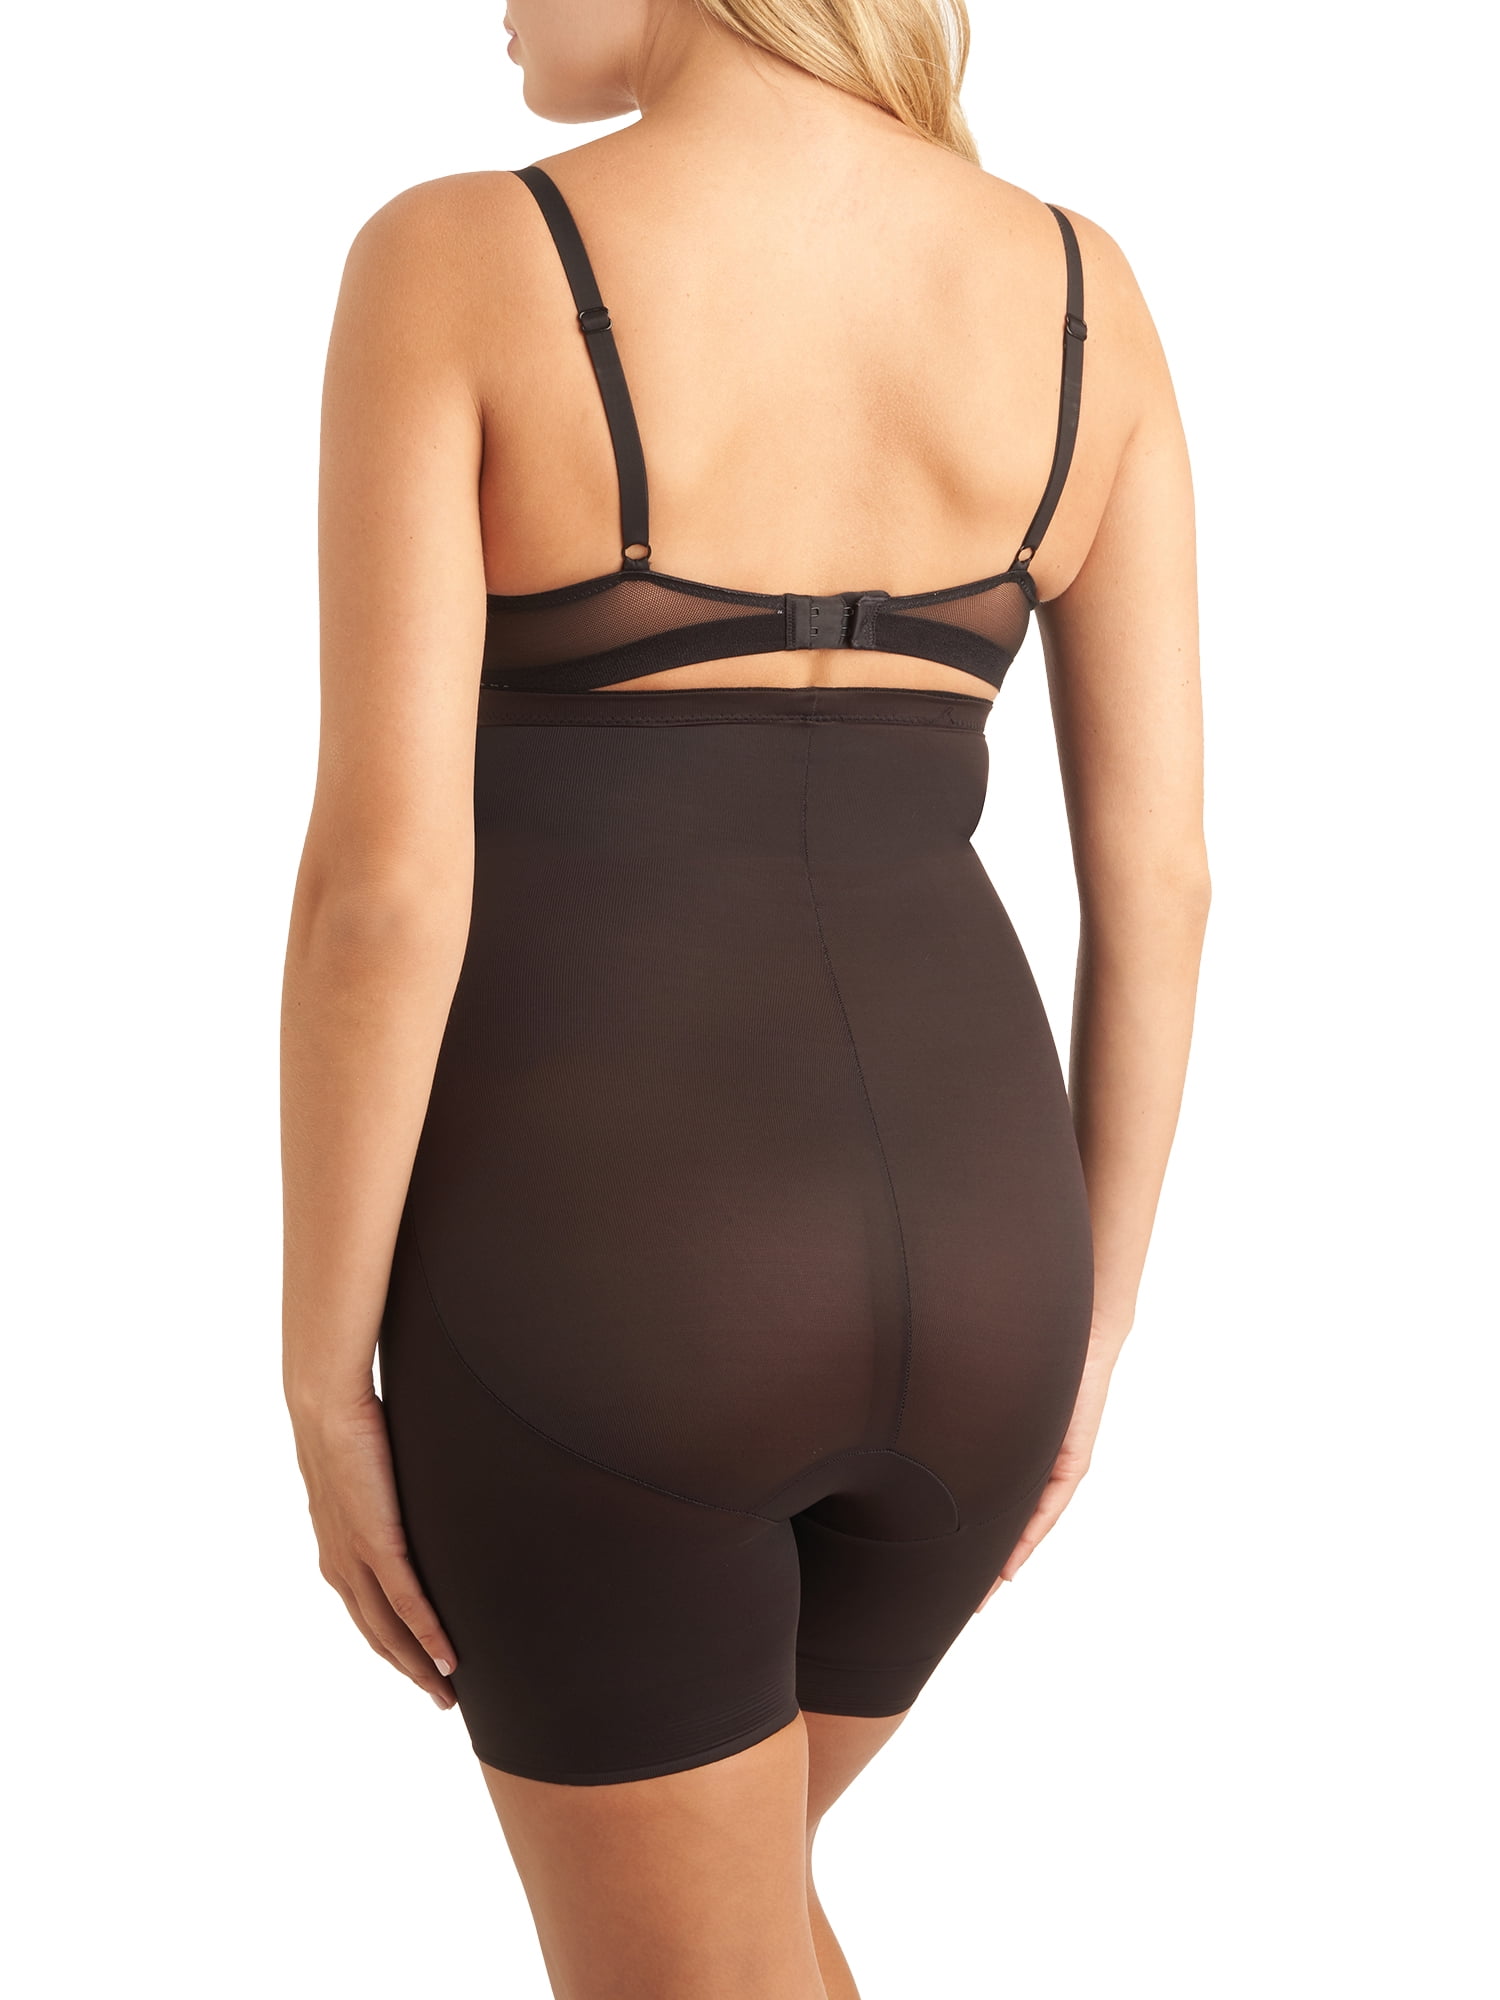 Village Market - Because they are twice as nice, this week Lady Luck  Shapewear is giving a 10% discount to all twins! Tag a twin to let them  know! #shapewearstore #shapewear #ladyluckshapewear #